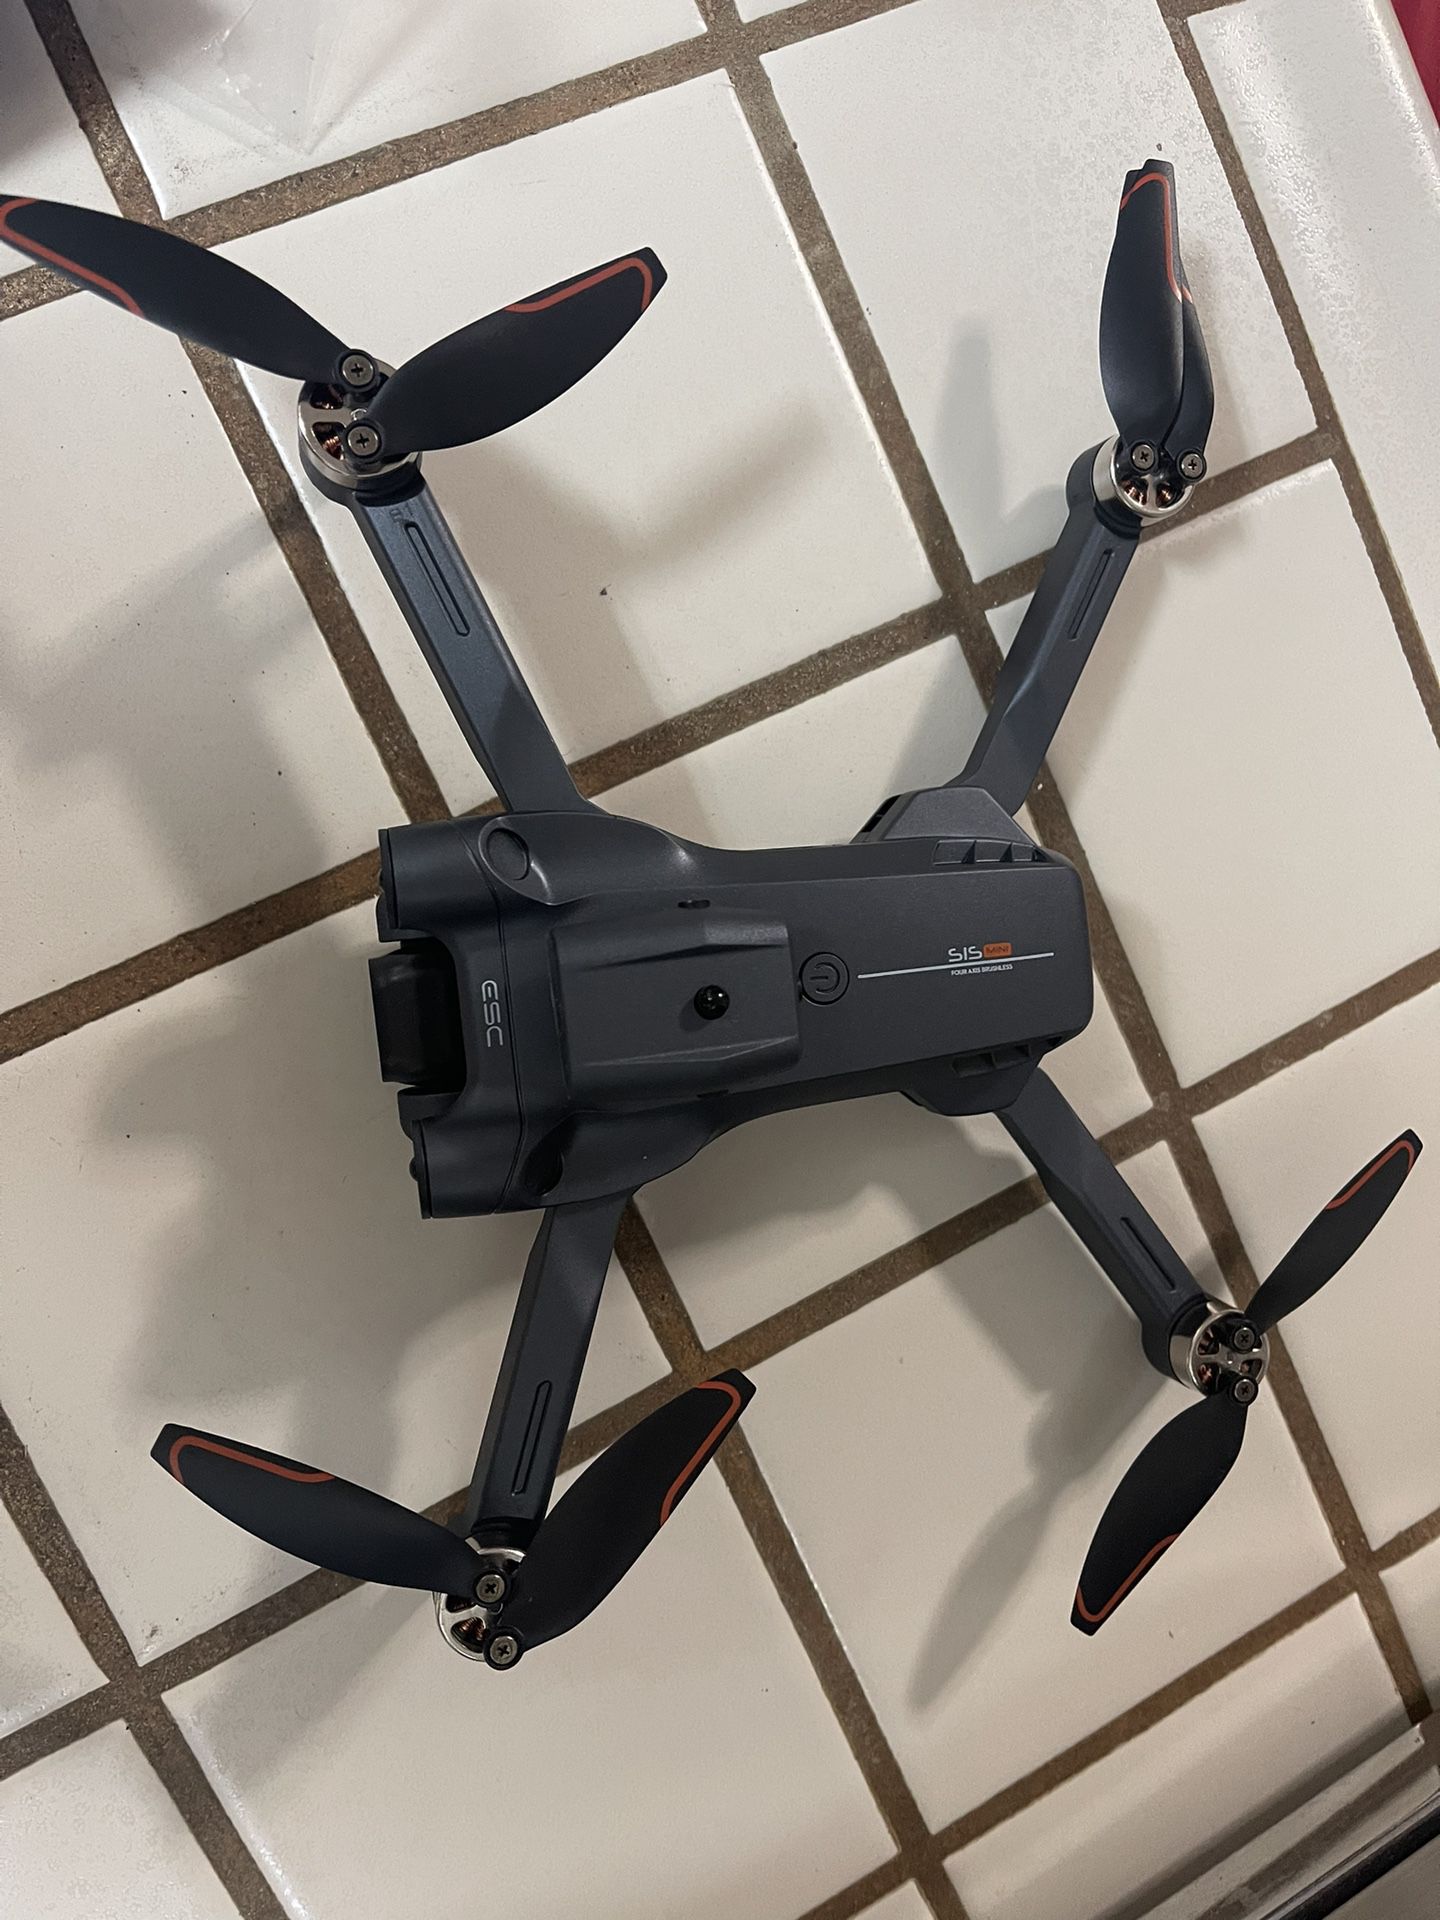 Drone With 4k Camera And High Speed Brushless